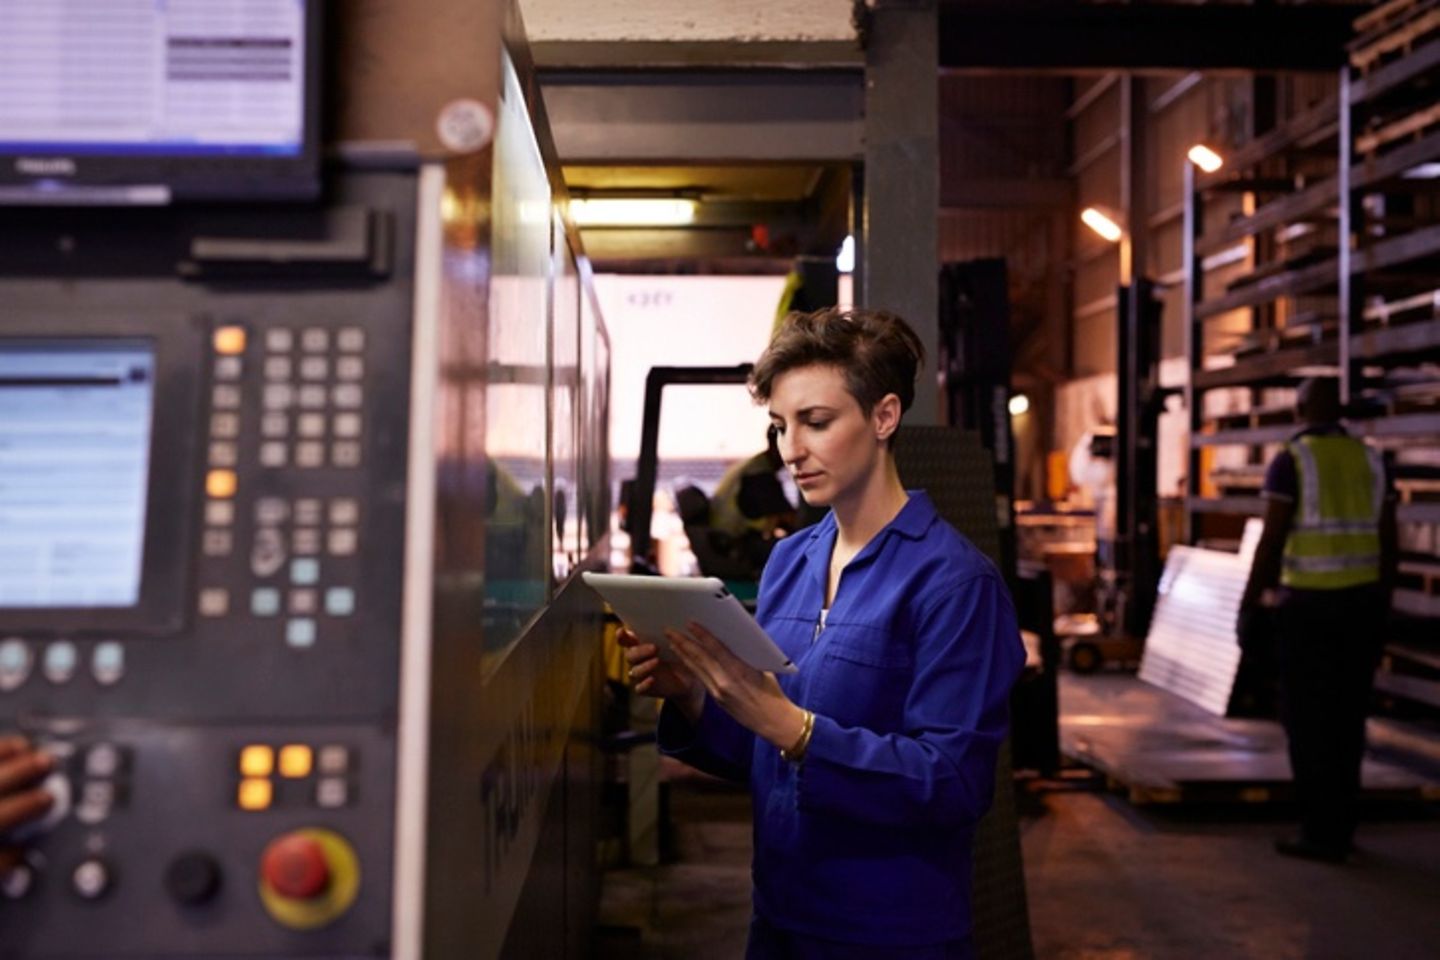 A female steel worker in a blue suit is holding a tablet in her hand.